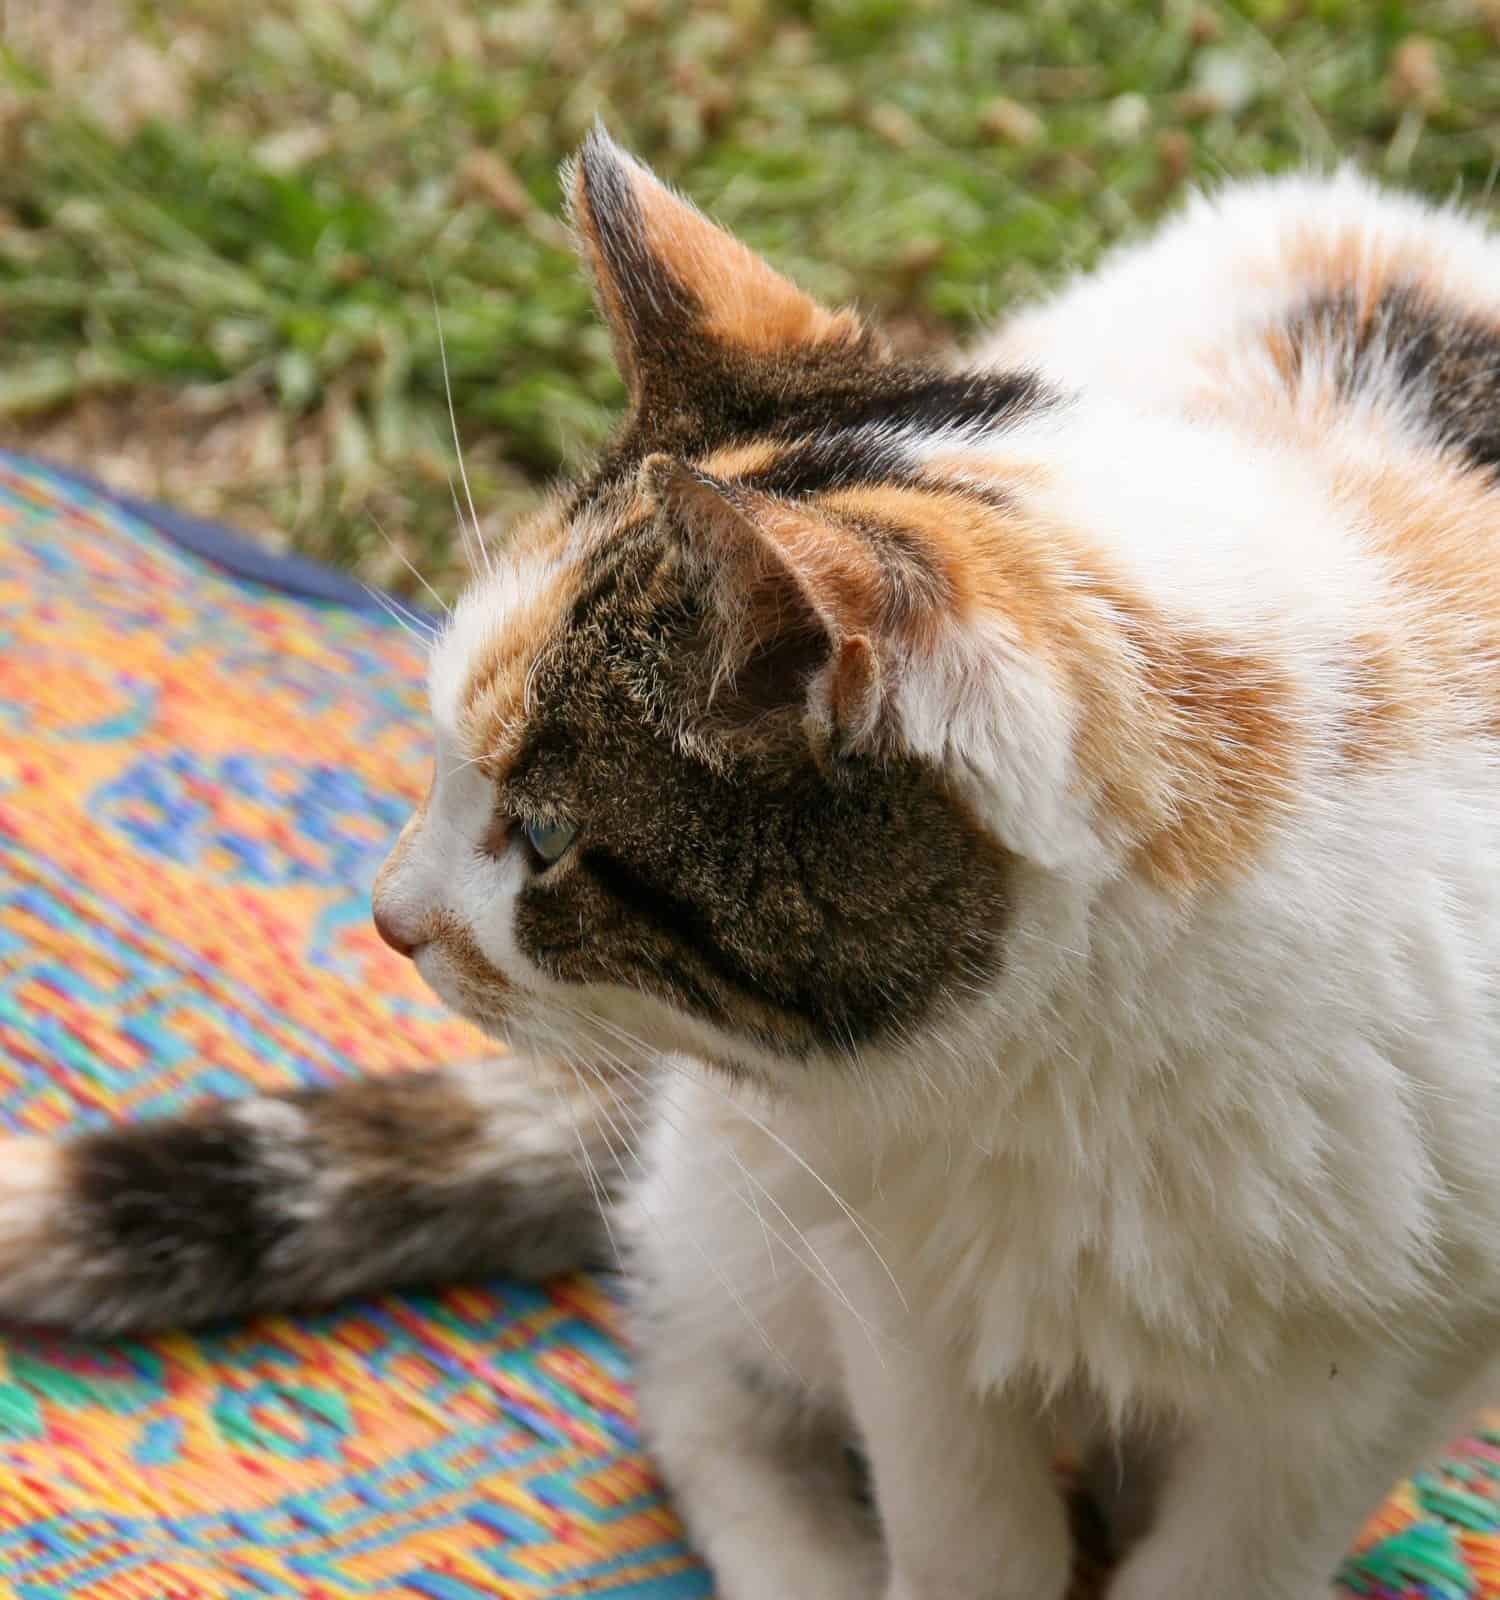 calico cat striking a majestic pose. This captivating image showcases the unique patterns and colors of the calico coat. Ideal for those seeking elegance and grace in feline photography